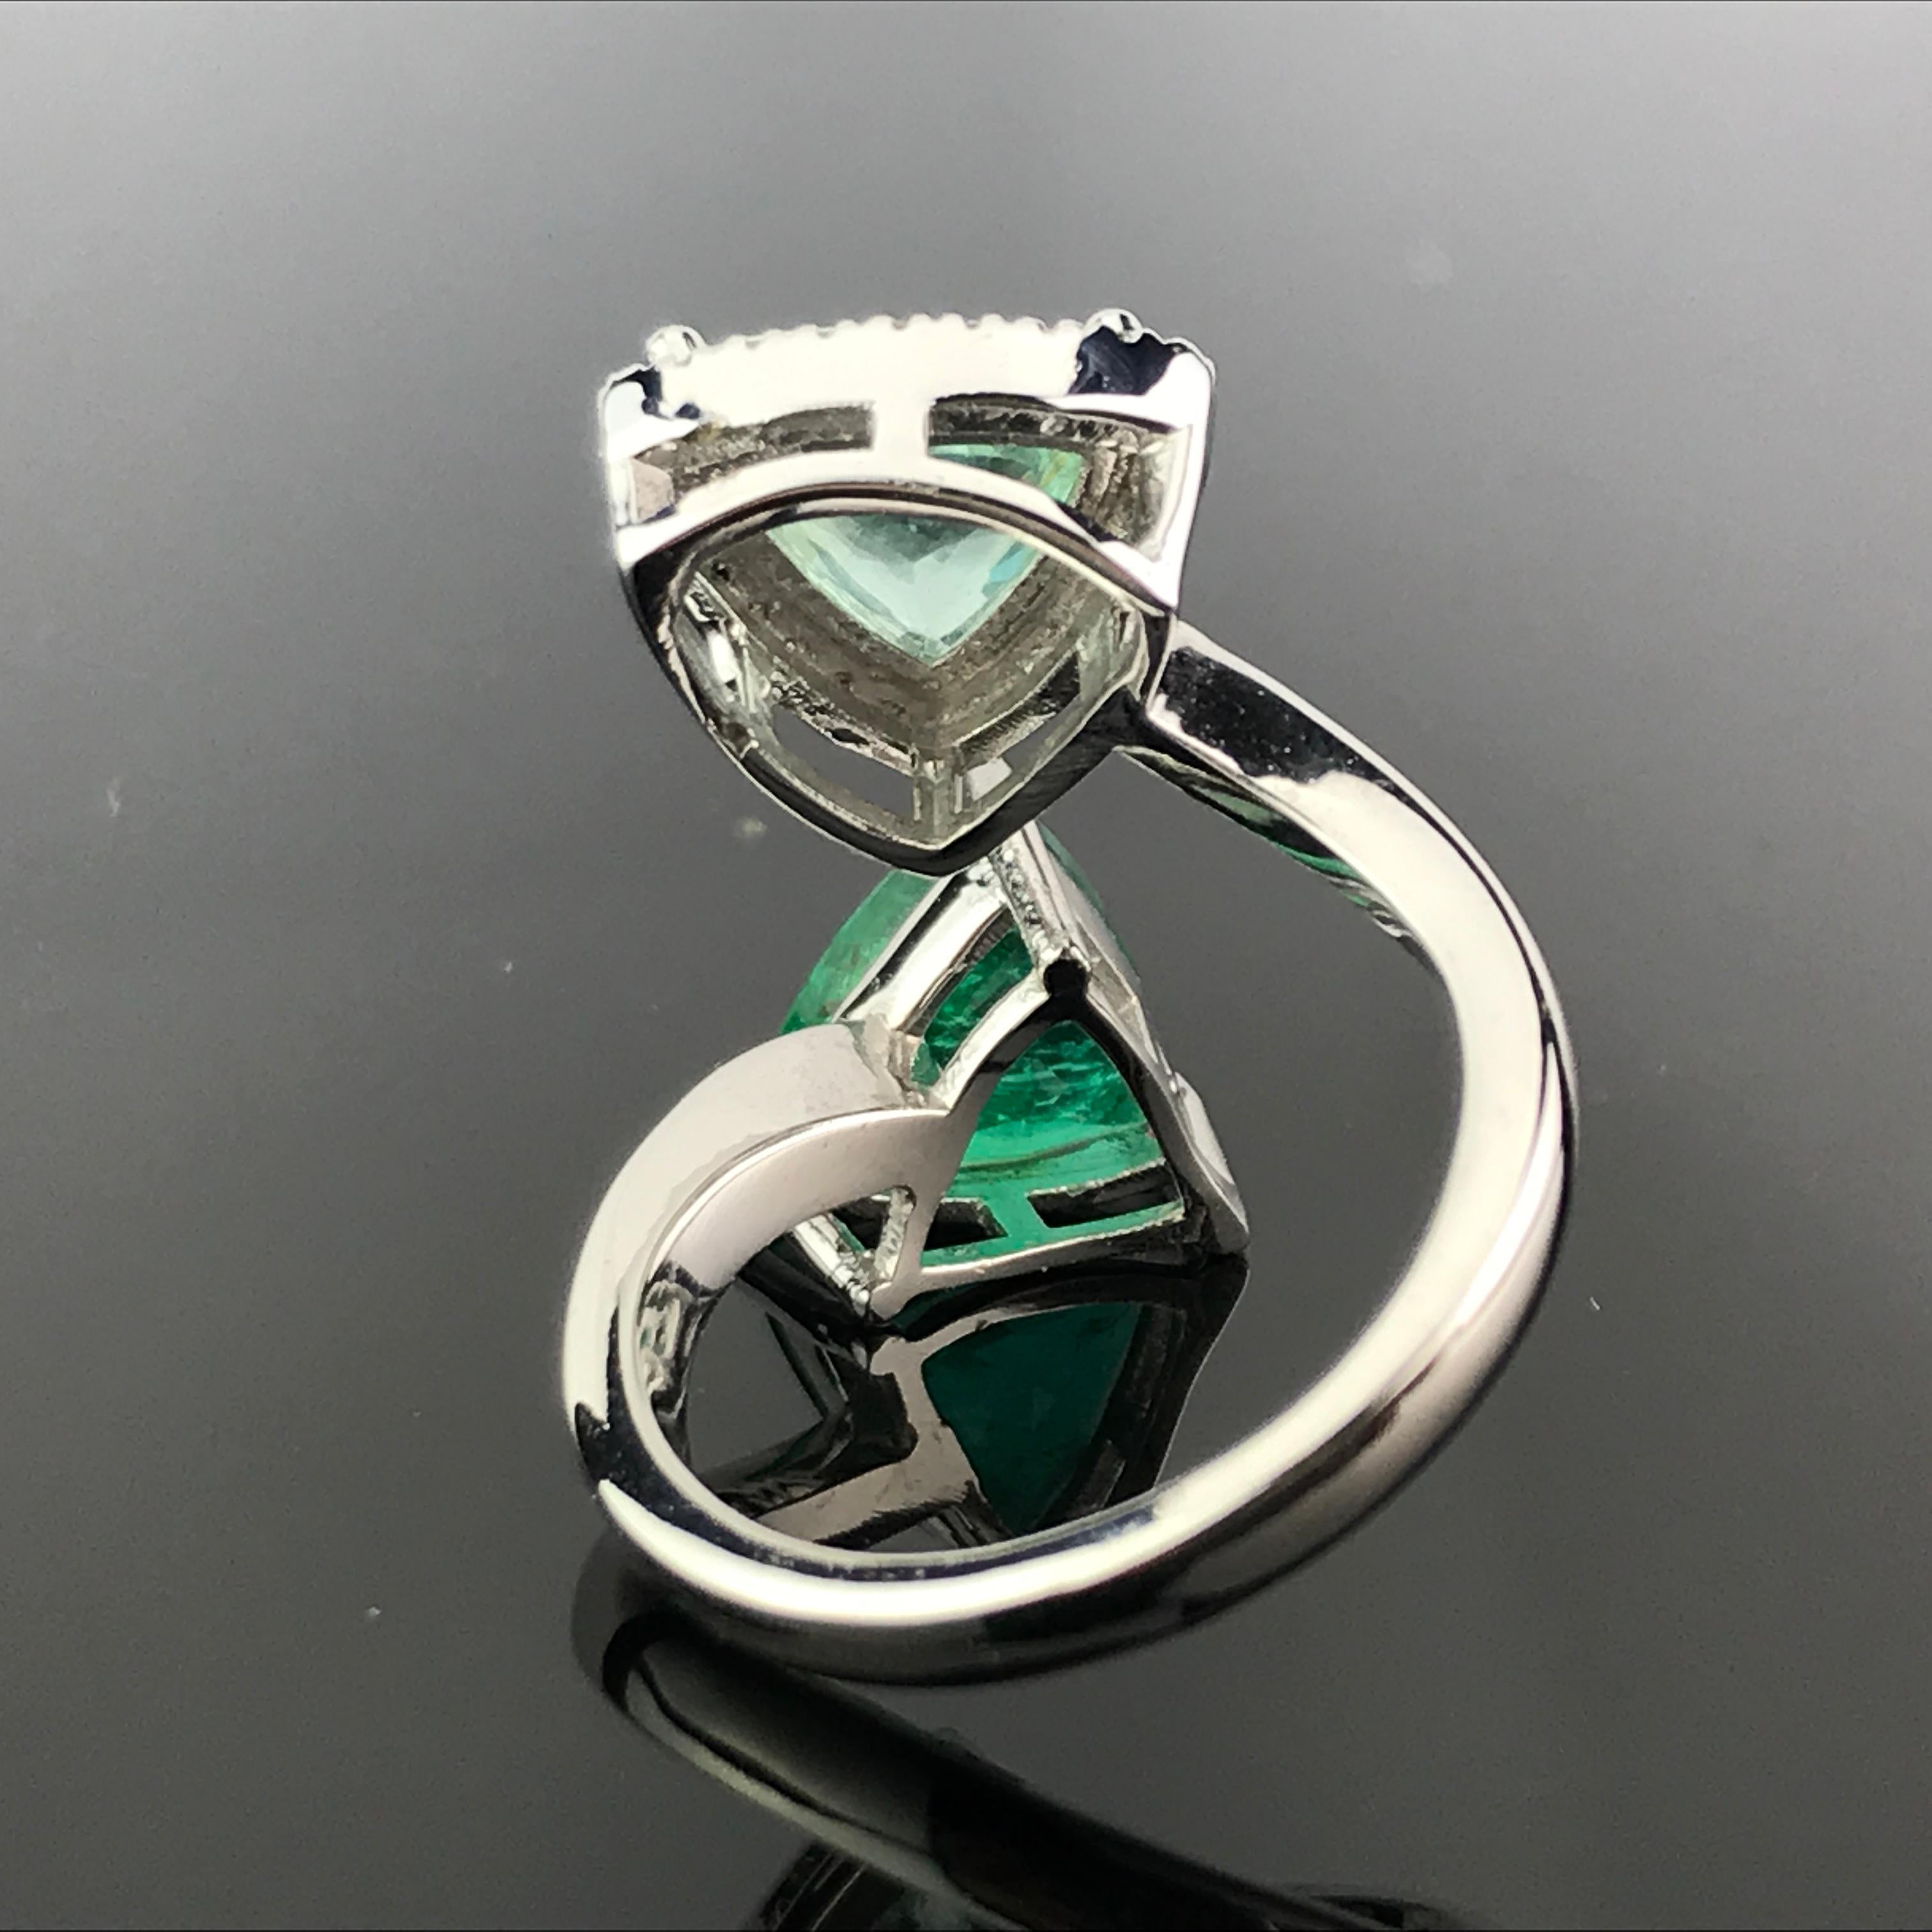 A statment ring, focusing on the trillion shaped Zambian Emerald and Pariaba Tourmaline, which complement each other beautifully.  Ring is currently sized at US 6, complimentary resizing/repolish service is provided. 

Stone Details:  
Stone: